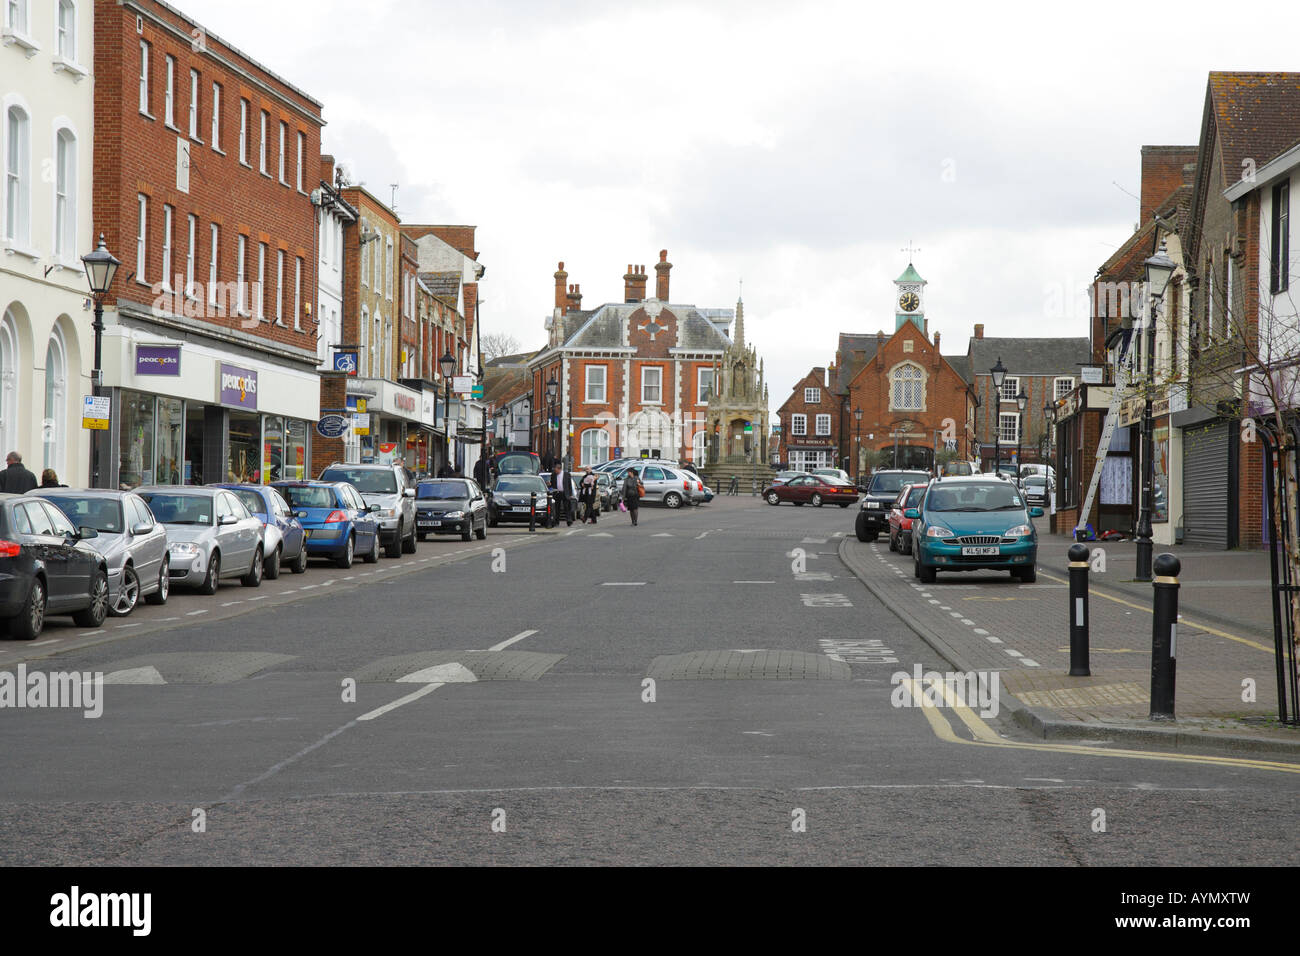 Bedfordshire town of Leighton Buzzard, High Street with the old Fire Station in the background Stock Photo